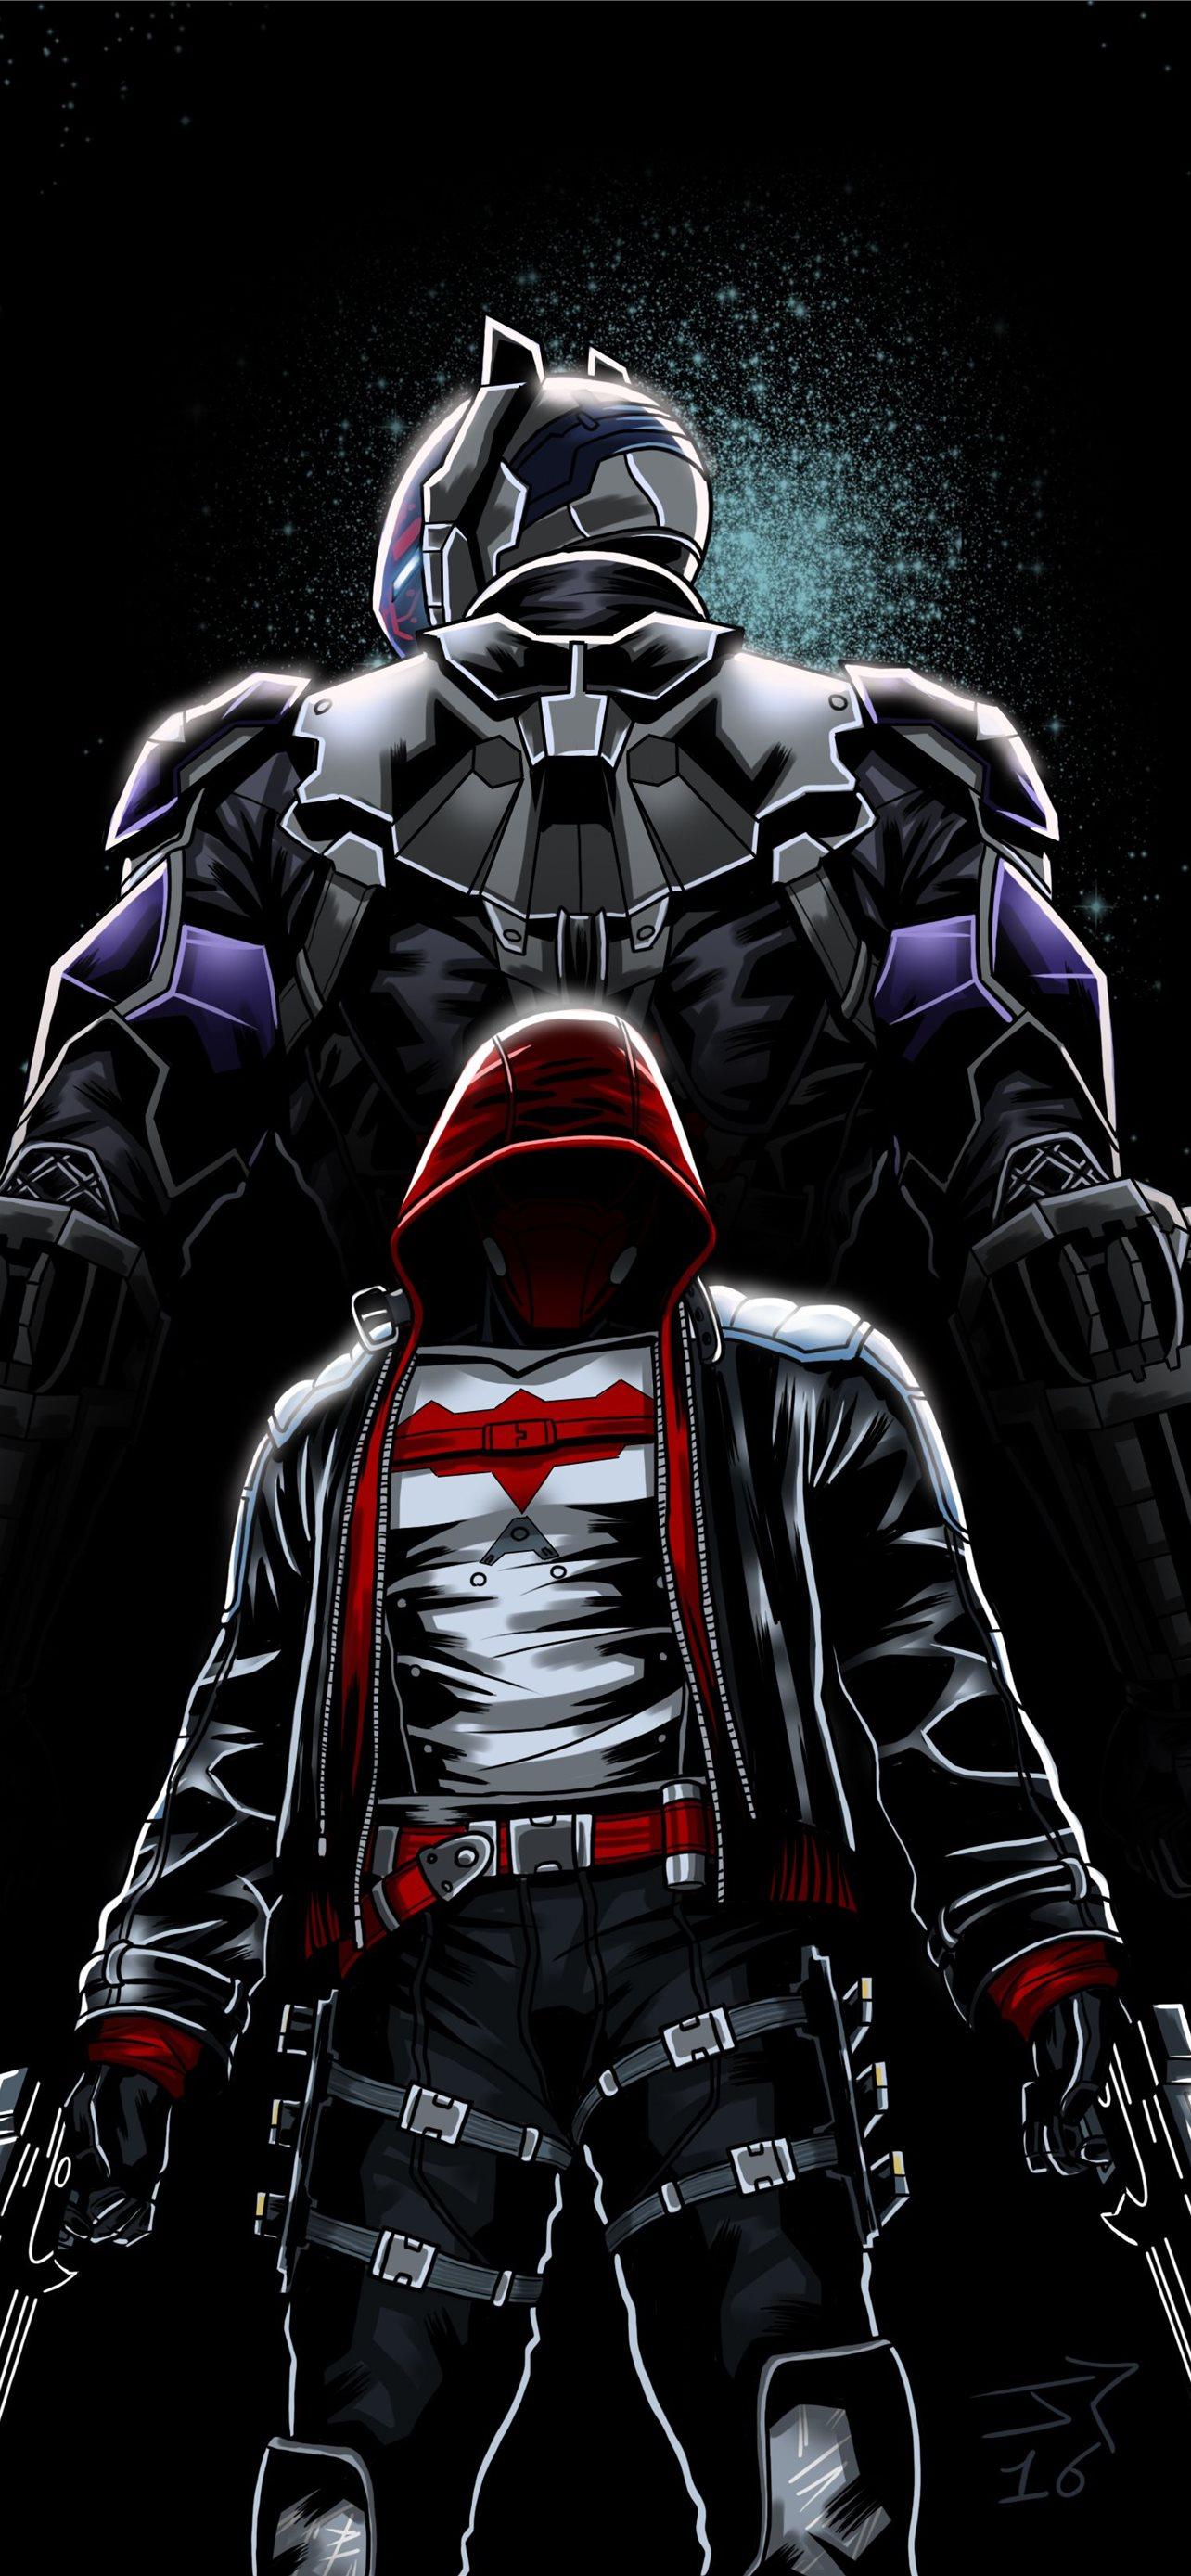 Red Hood Guns Up HD Superheroes 4k Wallpapers Images Backgrounds  Photos and Pictures